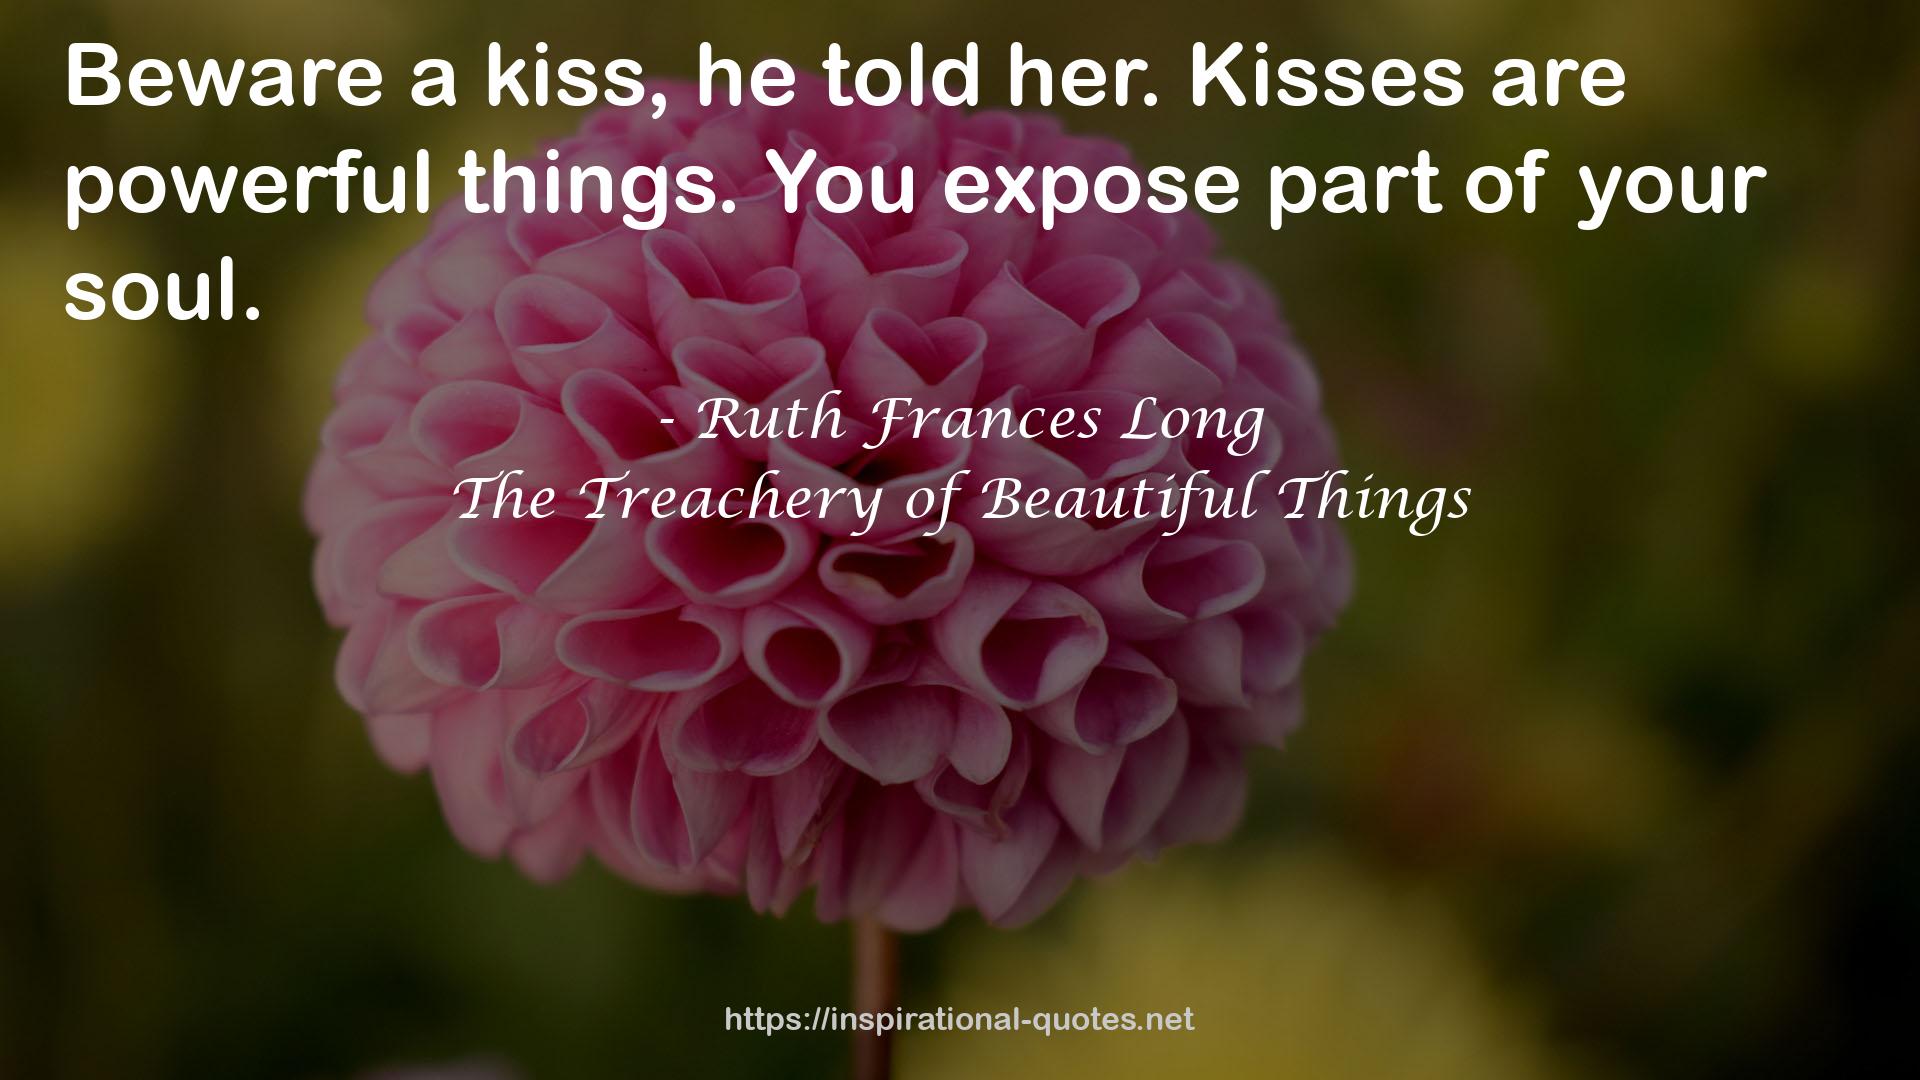 The Treachery of Beautiful Things QUOTES